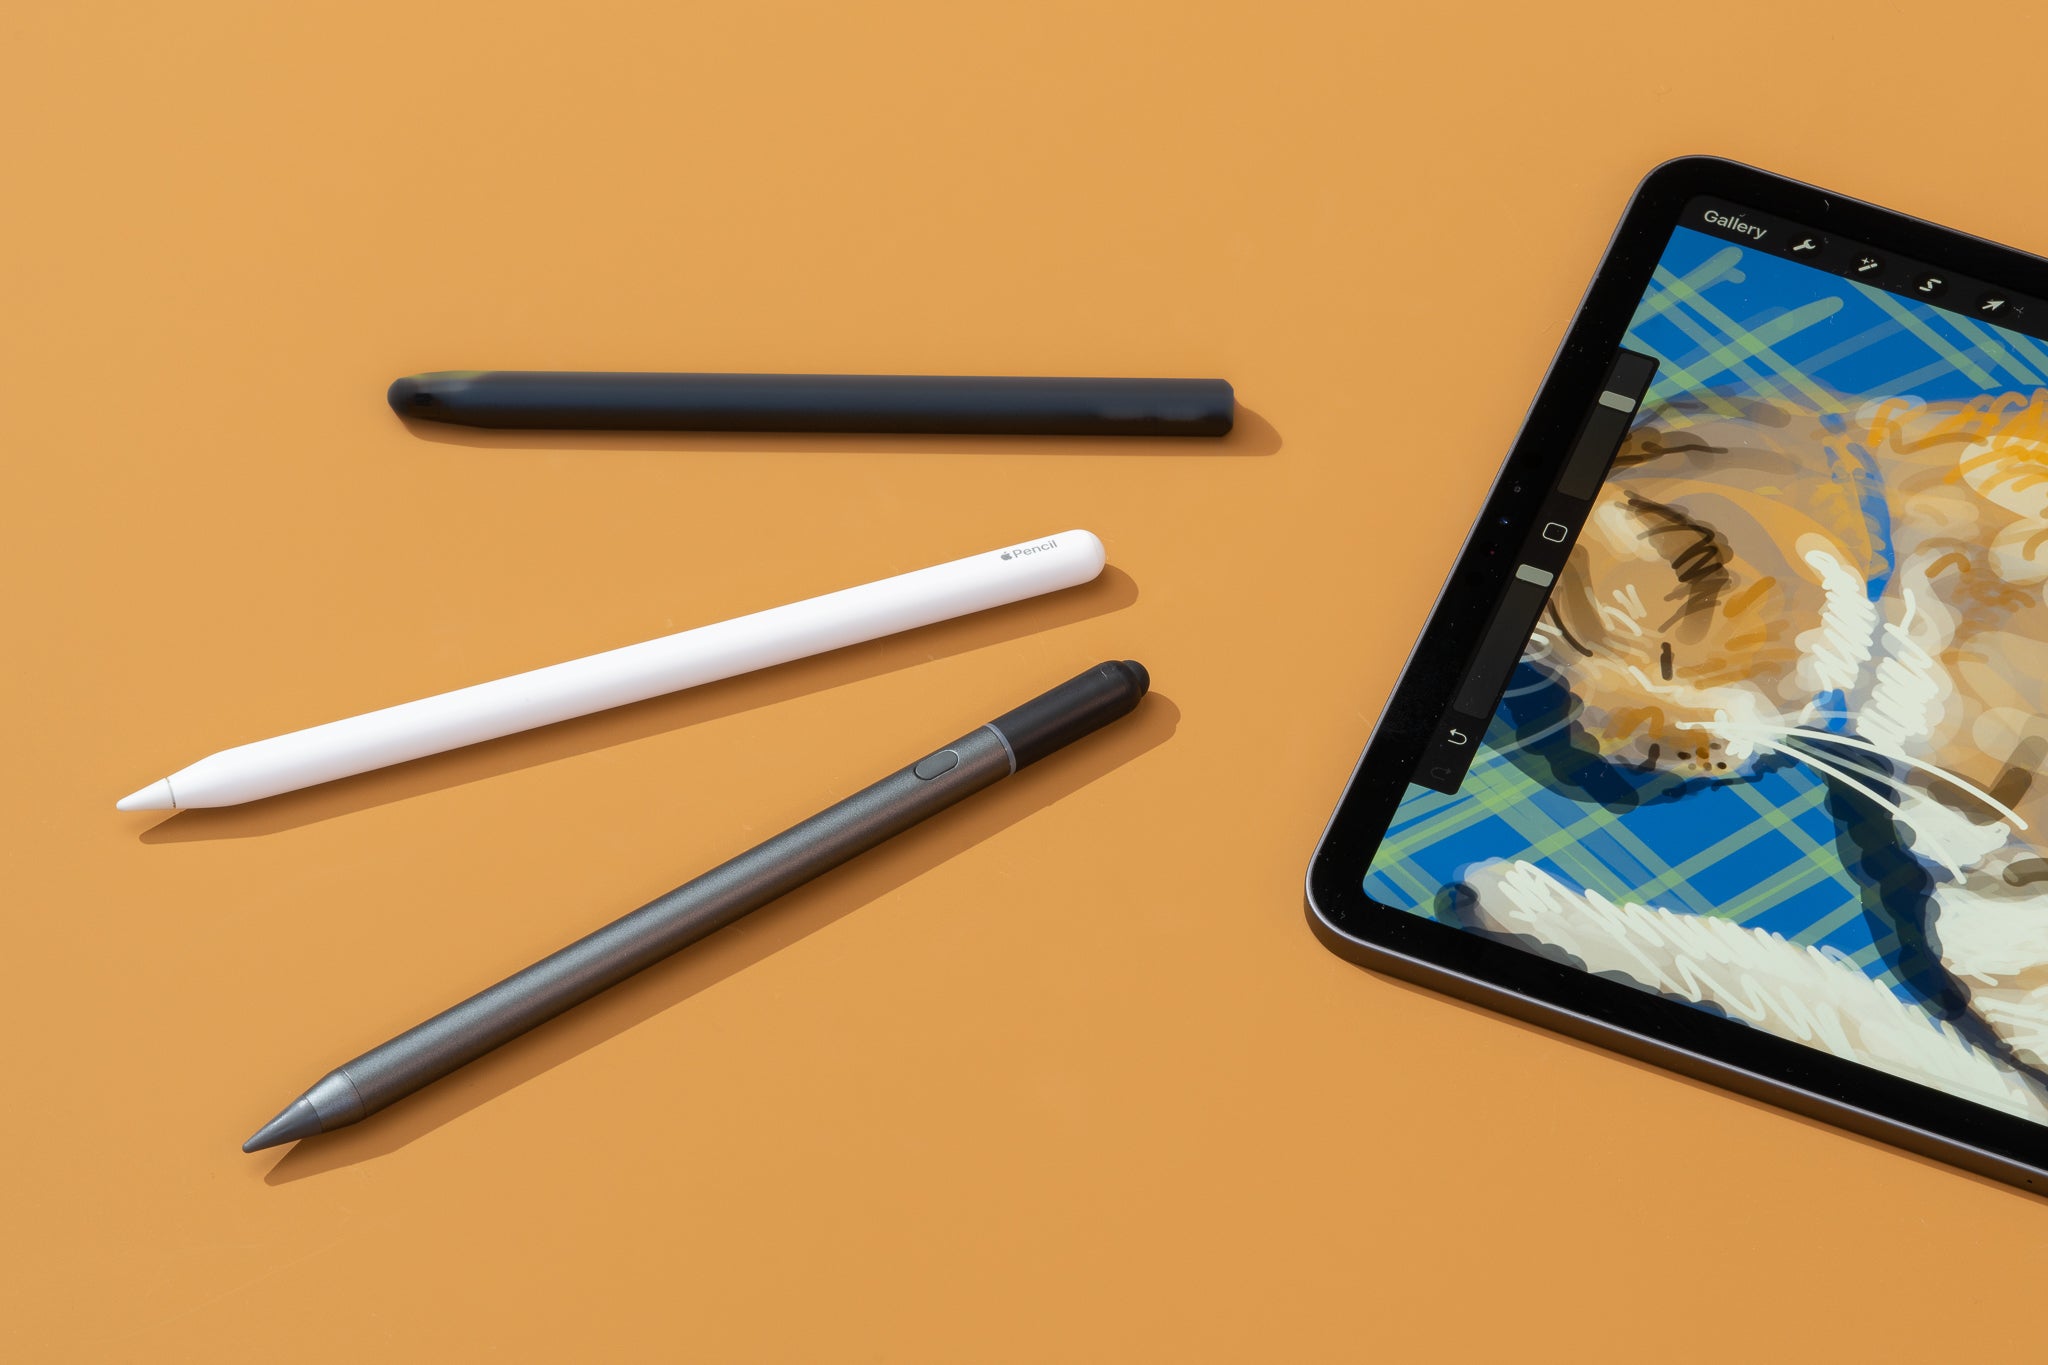 ipad-stylus-compatibility-models-that-support-styluses